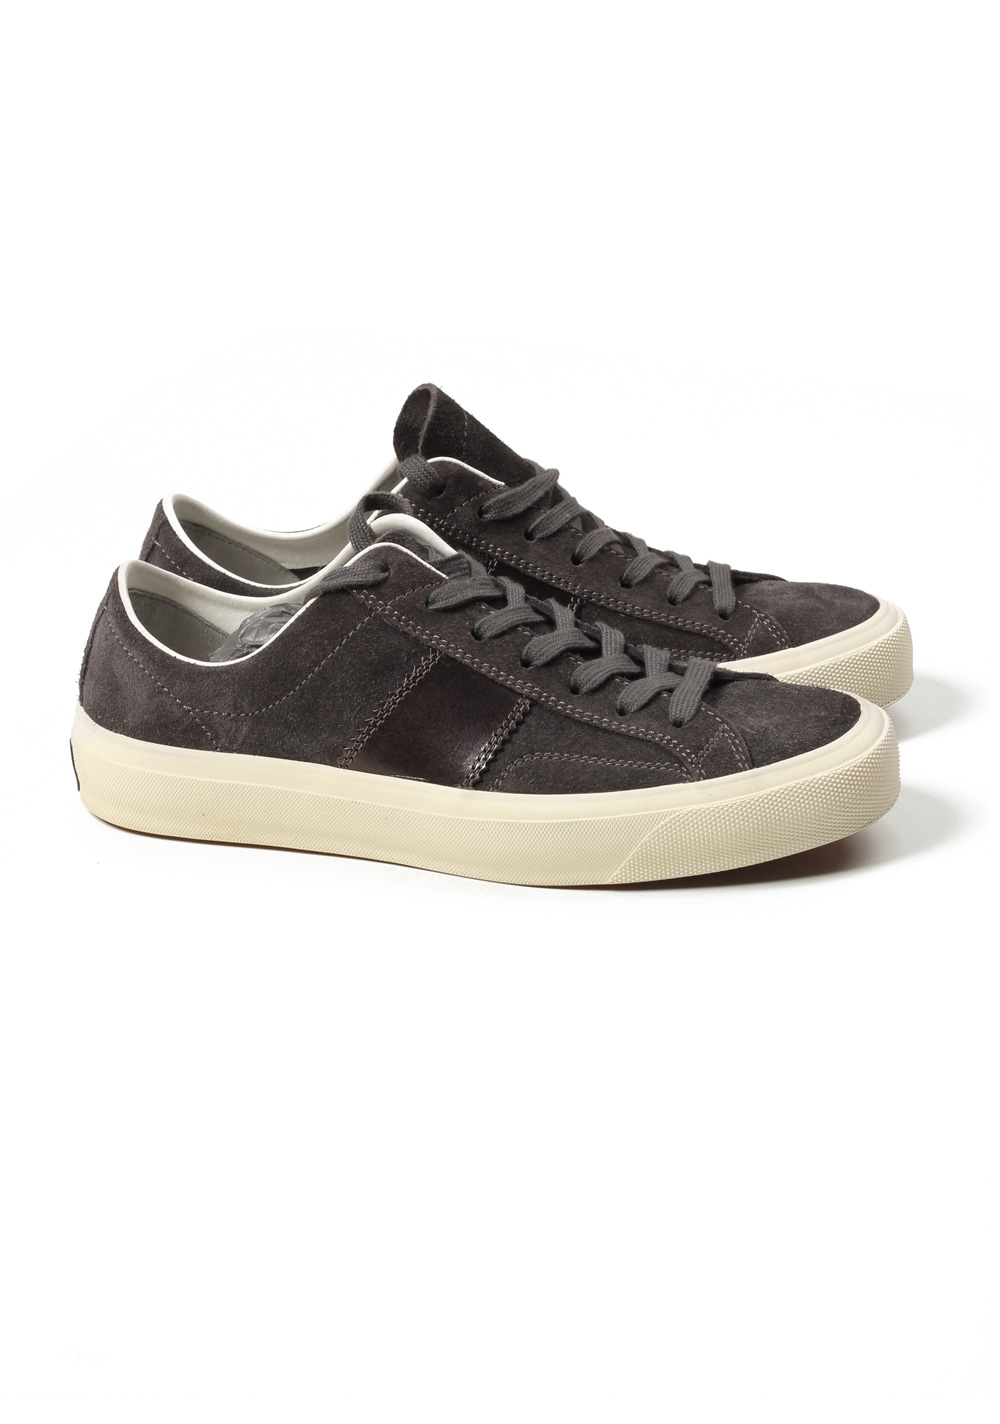 TOM FORD Cambridge Lace Up Dark Gray Suede Sneaker Shoes Size 8,5 UK / 9,5 U.S. | Costume Limité